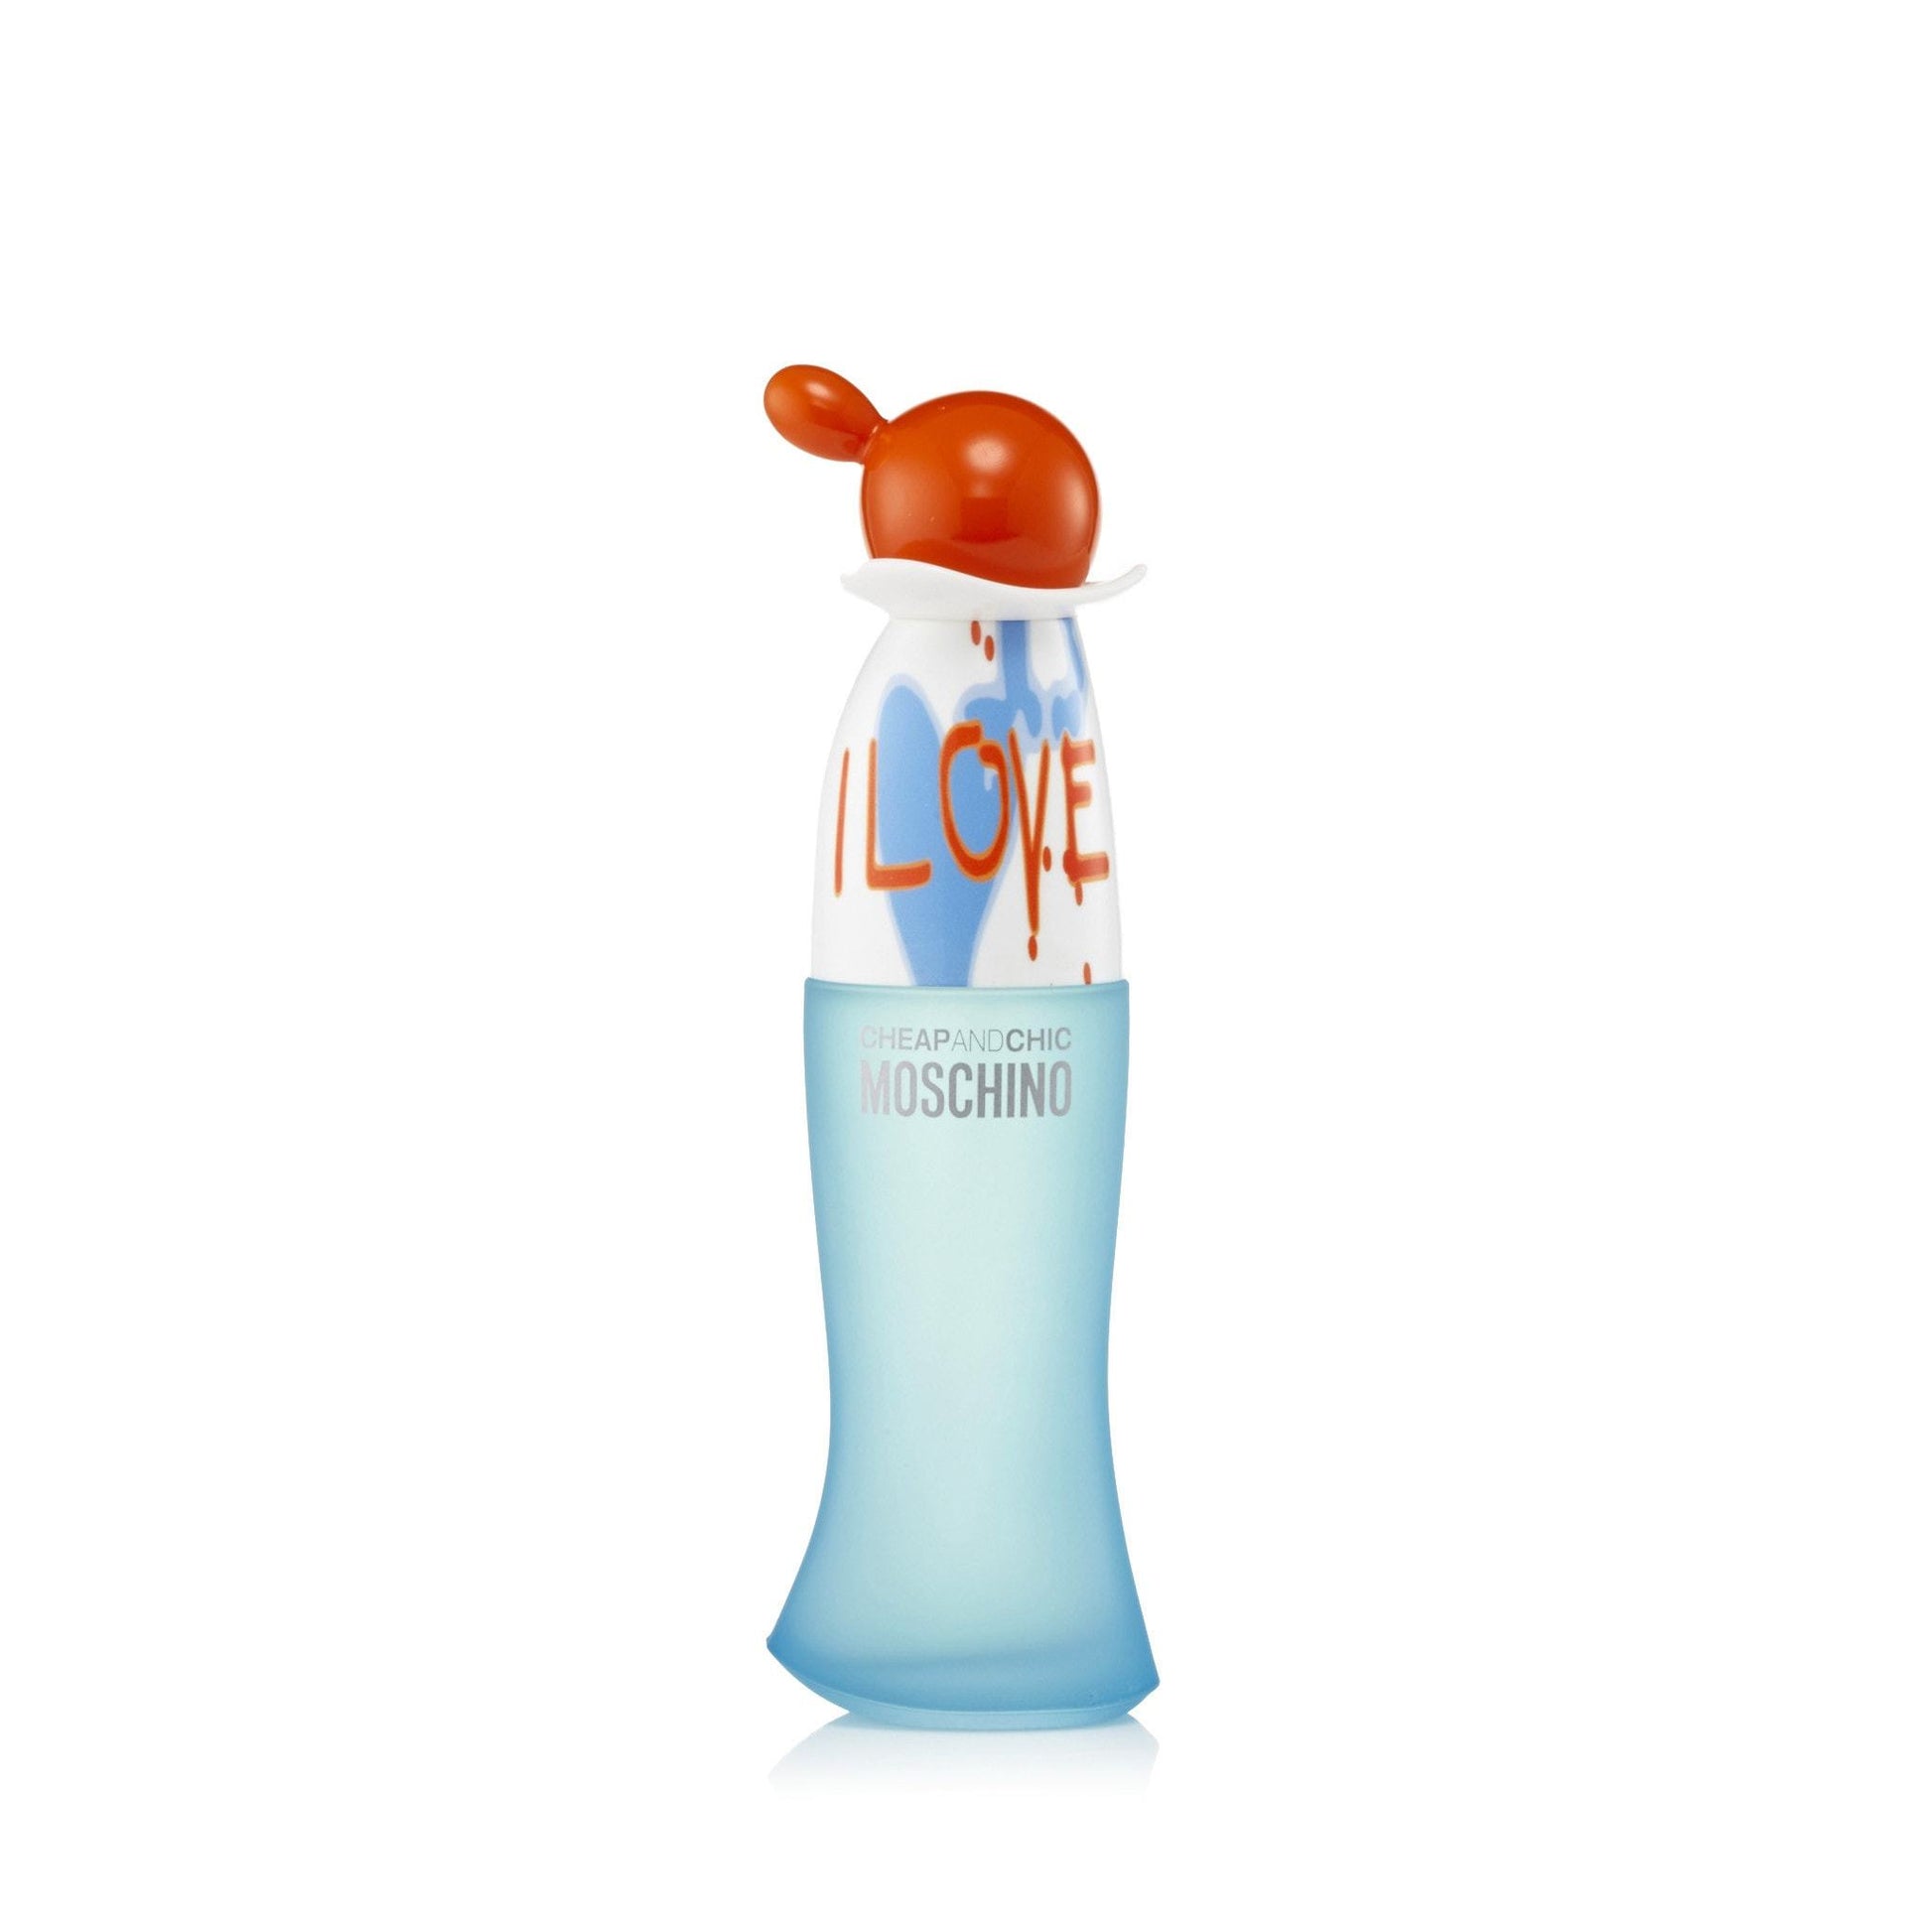 I Love Love Eau de Toilette Spray for Women by Moschino, Product image 4